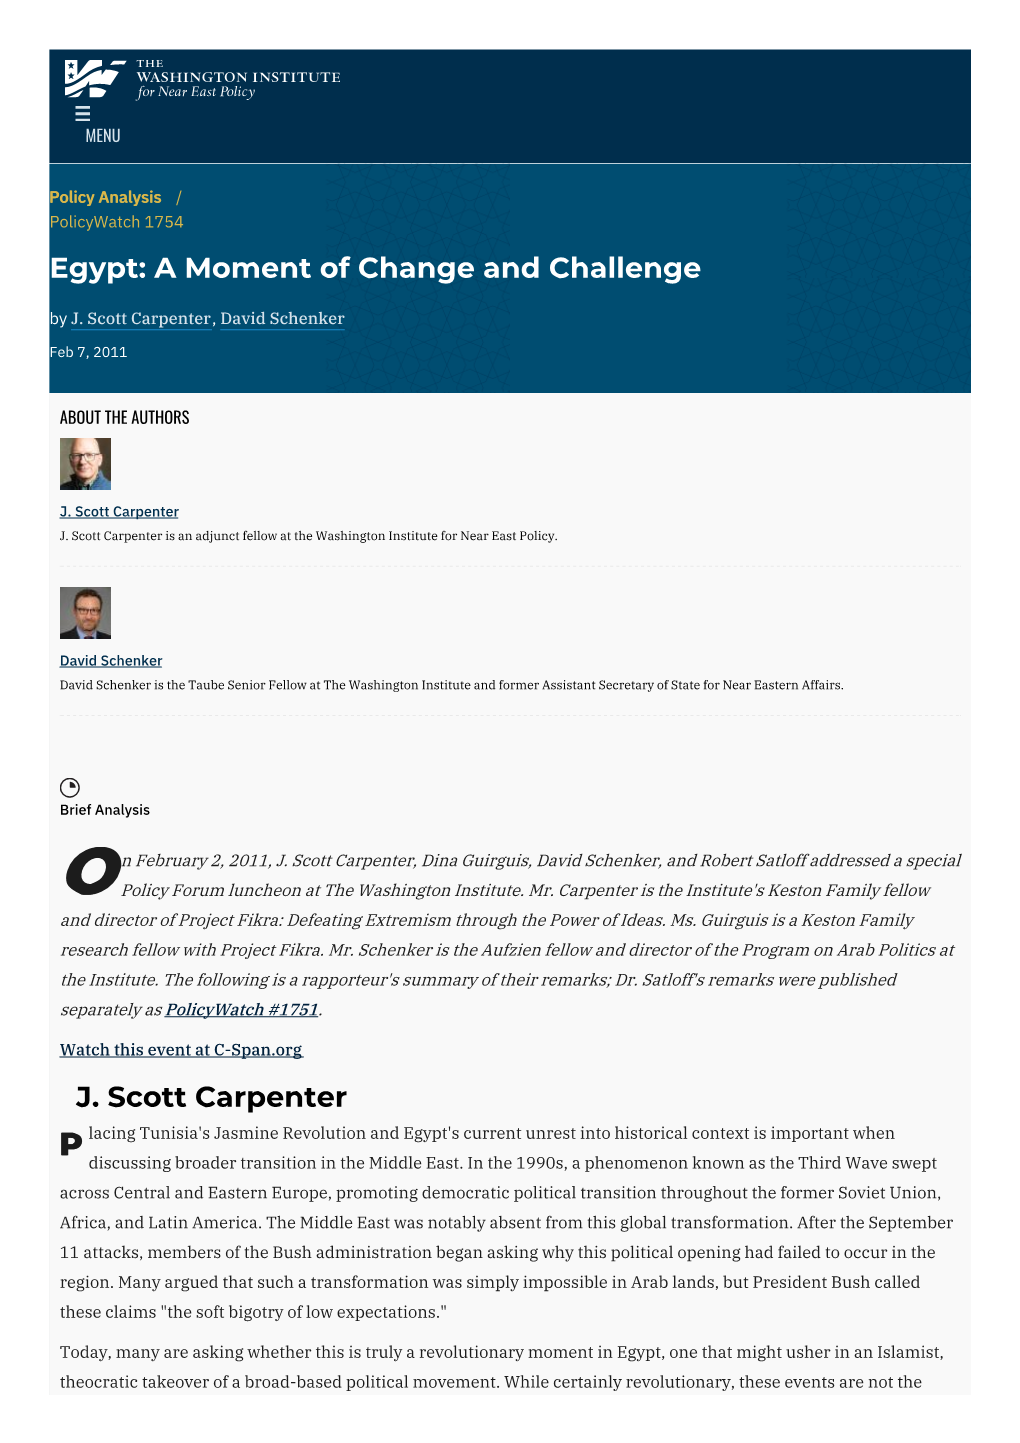 Egypt: a Moment of Change and Challenge | the Washington Institute